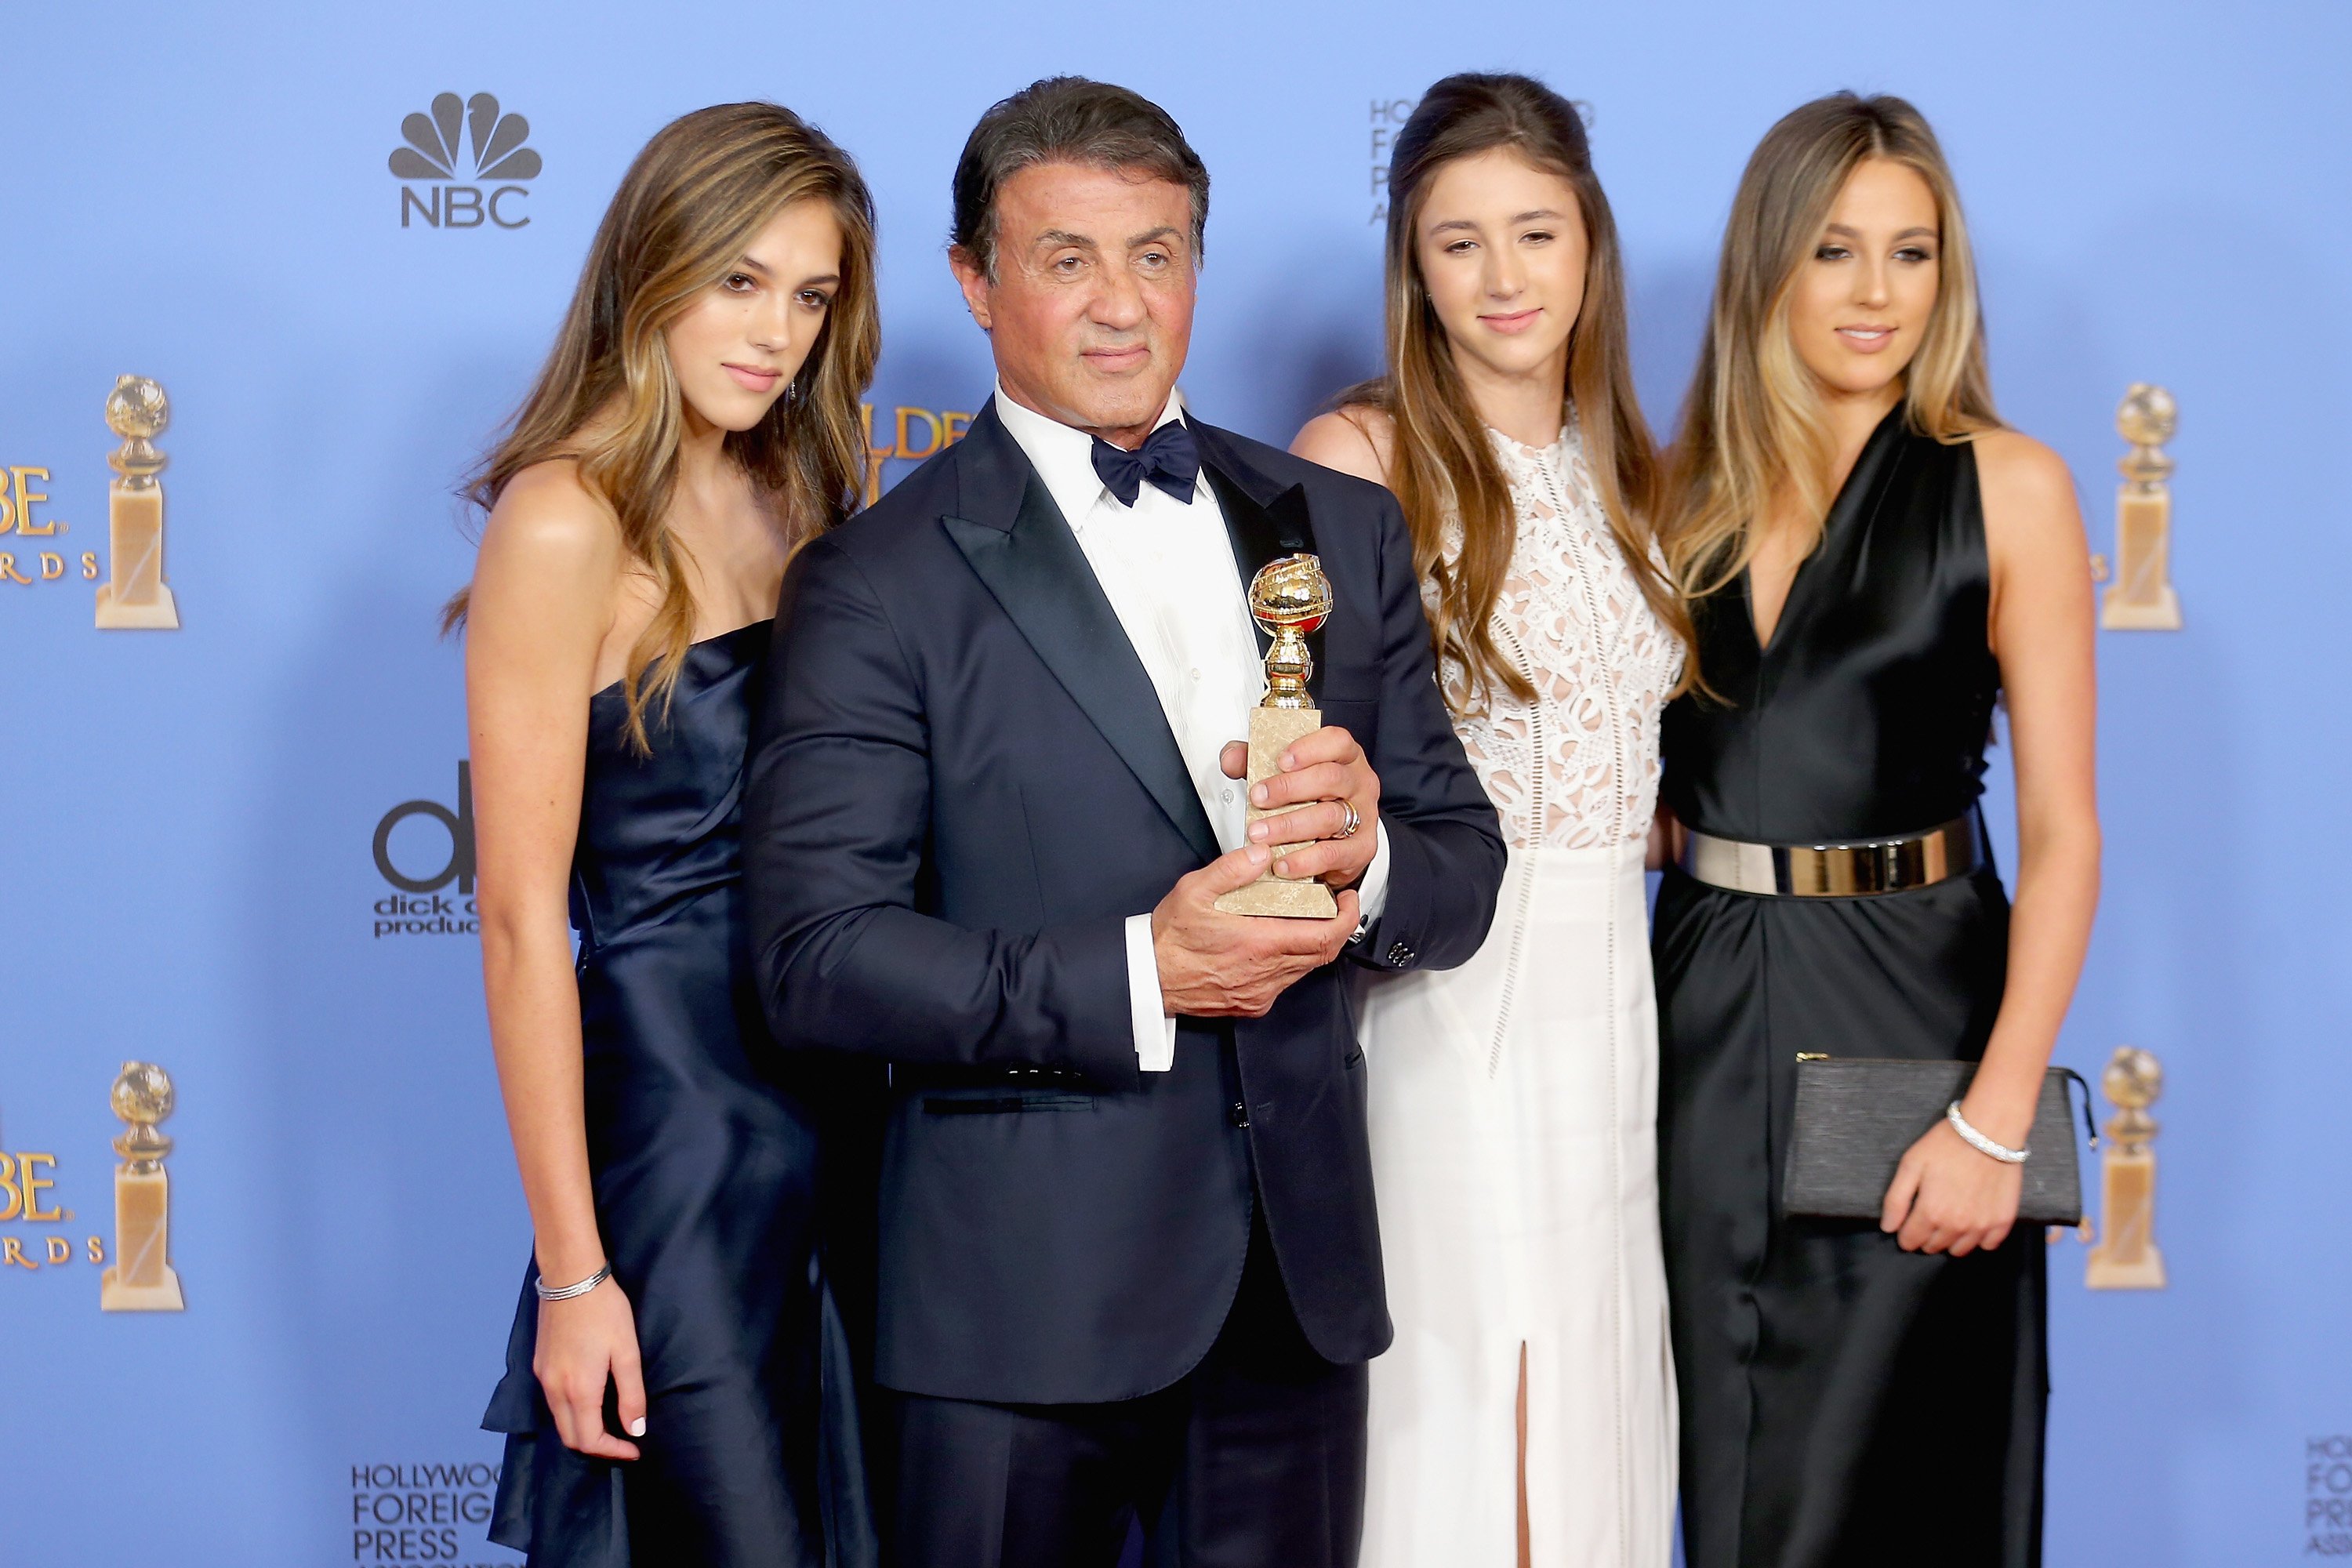 Sylvester Stallone and his three daughters Sophia, Sistine, and Scarlet. I Image: Getty Images.